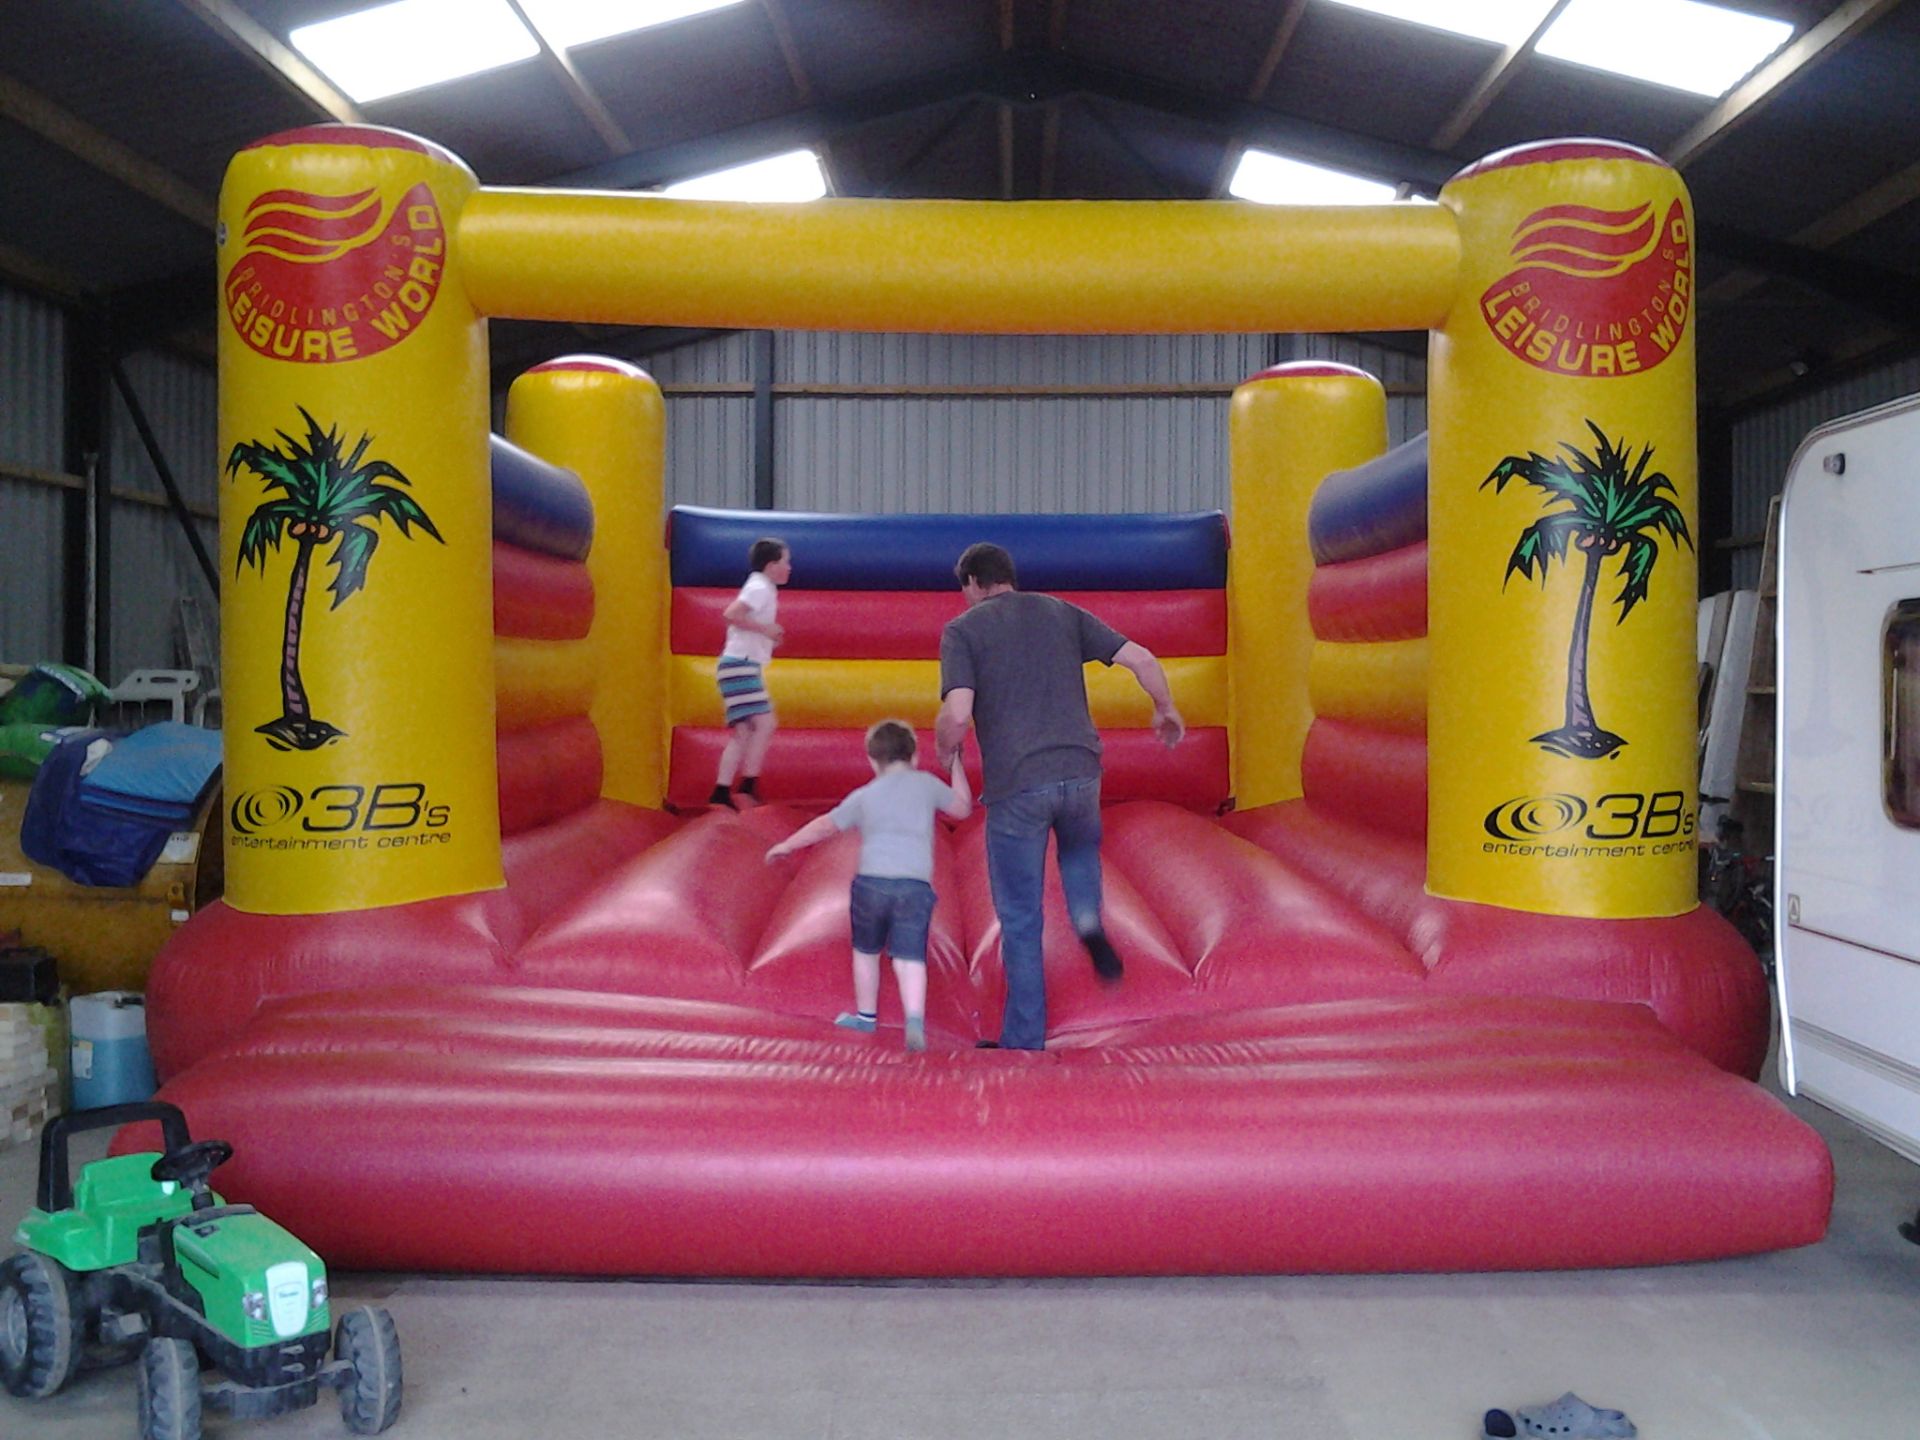 BEETEE Bouncy castle, approx. 7.2m x 5.2m x 3.5m, - Image 2 of 6